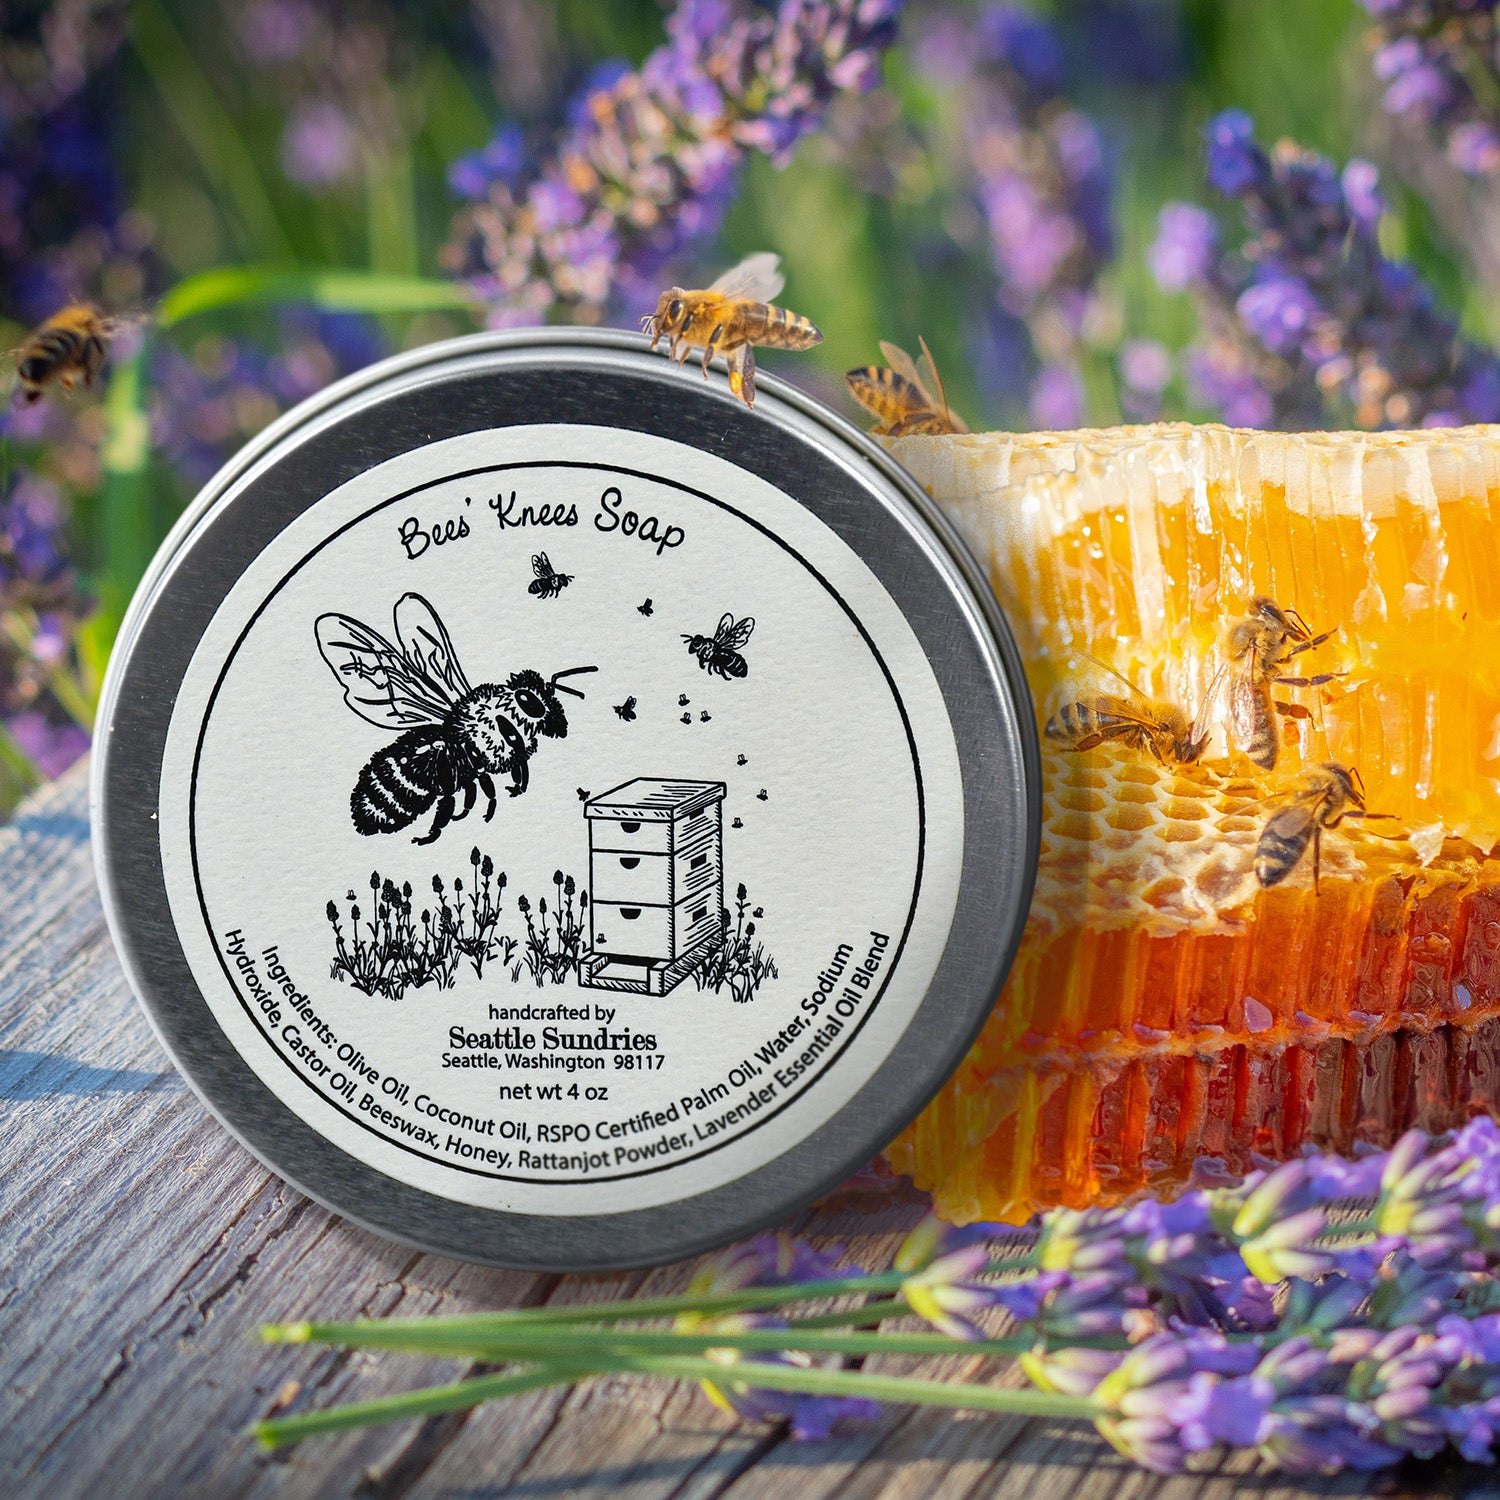 The Air Dry Soap Saver - Beauty and the Bees